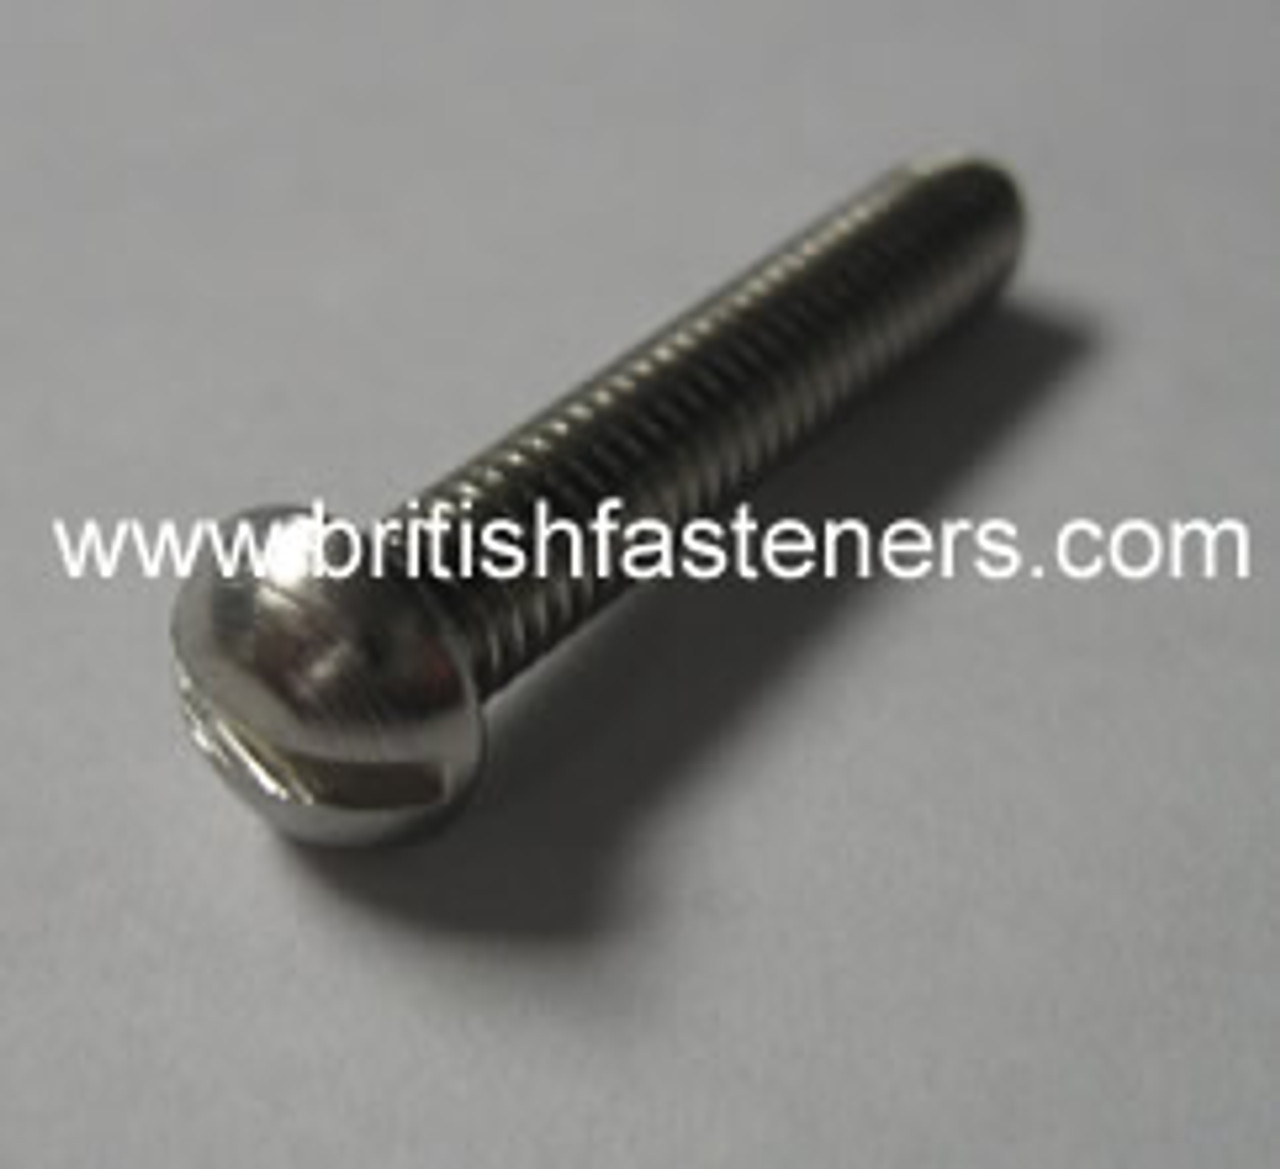 2 BA x 1/2" Stainless Steel Slotted Round head screw - (6622)